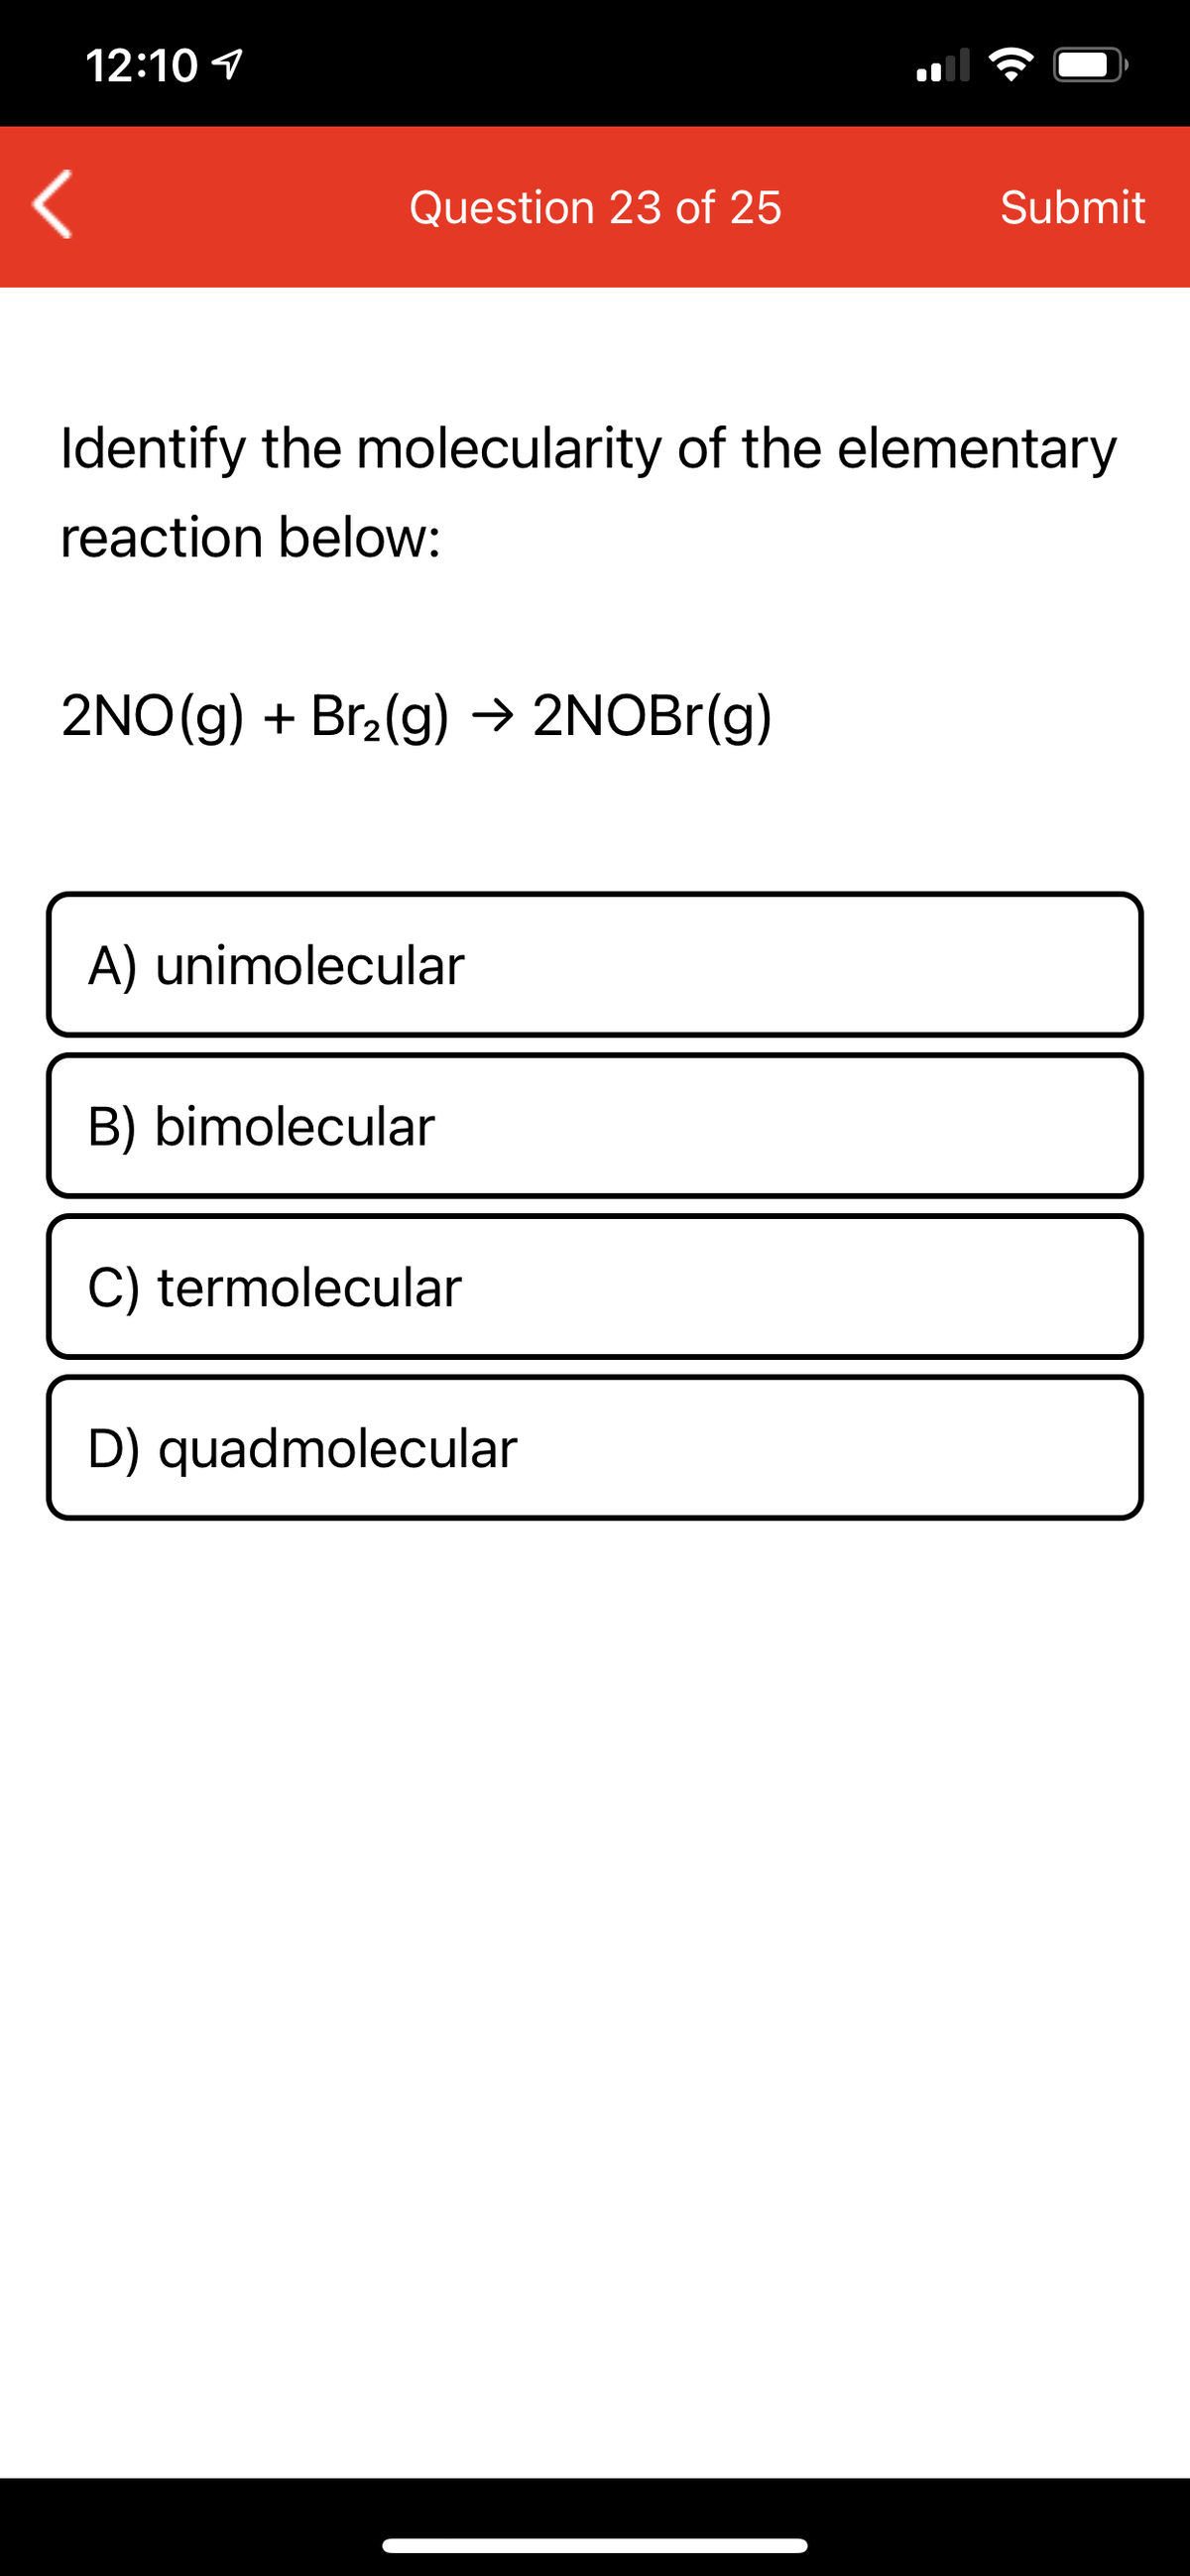 12:10 1
Question 23 of 25
Submit
Identify the molecularity of the elementary
reaction below:
2NO(g) + Br2(g) → 2NOBr(g)
A) unimolecular
B) bimolecular
C) termolecular
D) quadmolecular
